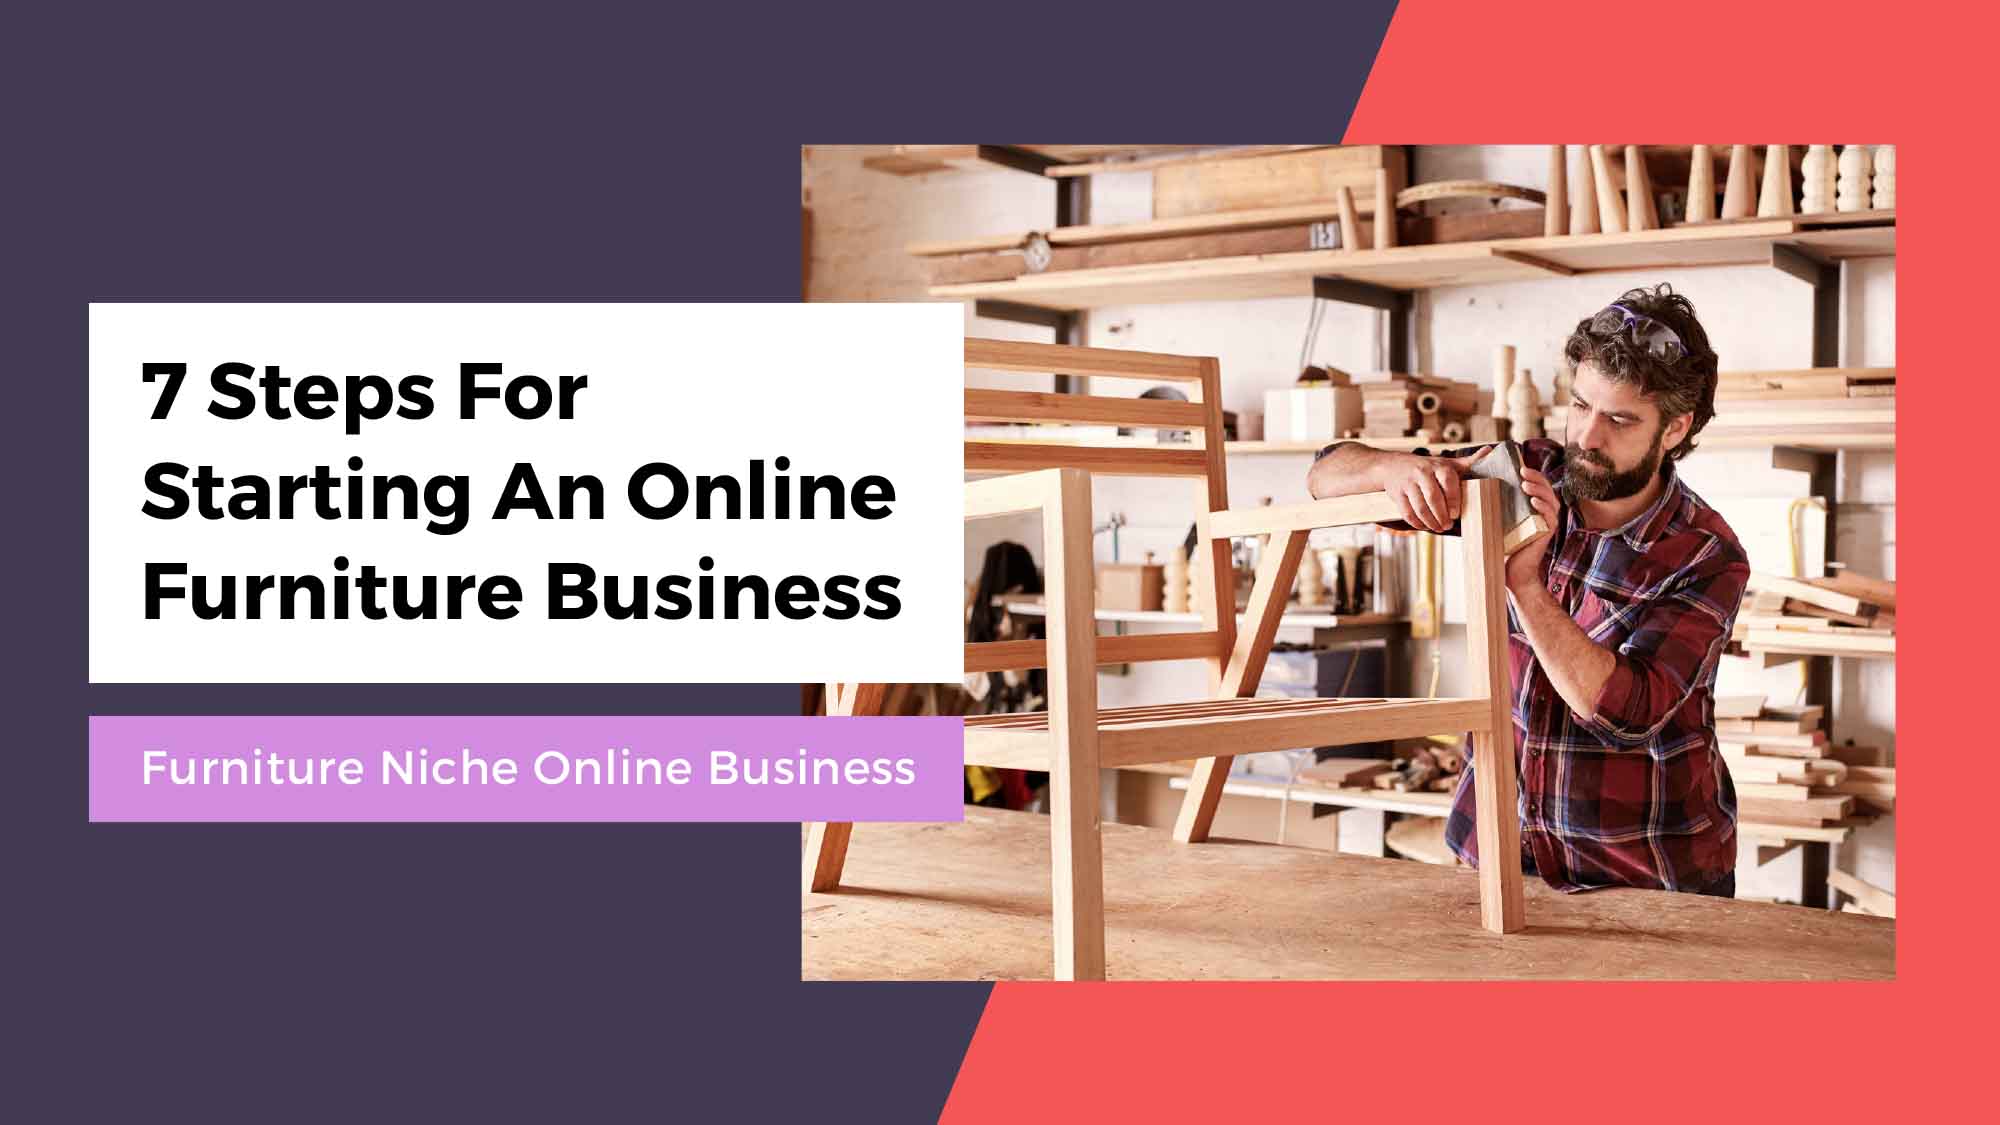 How To Start An Online Business Using the Furniture Niche